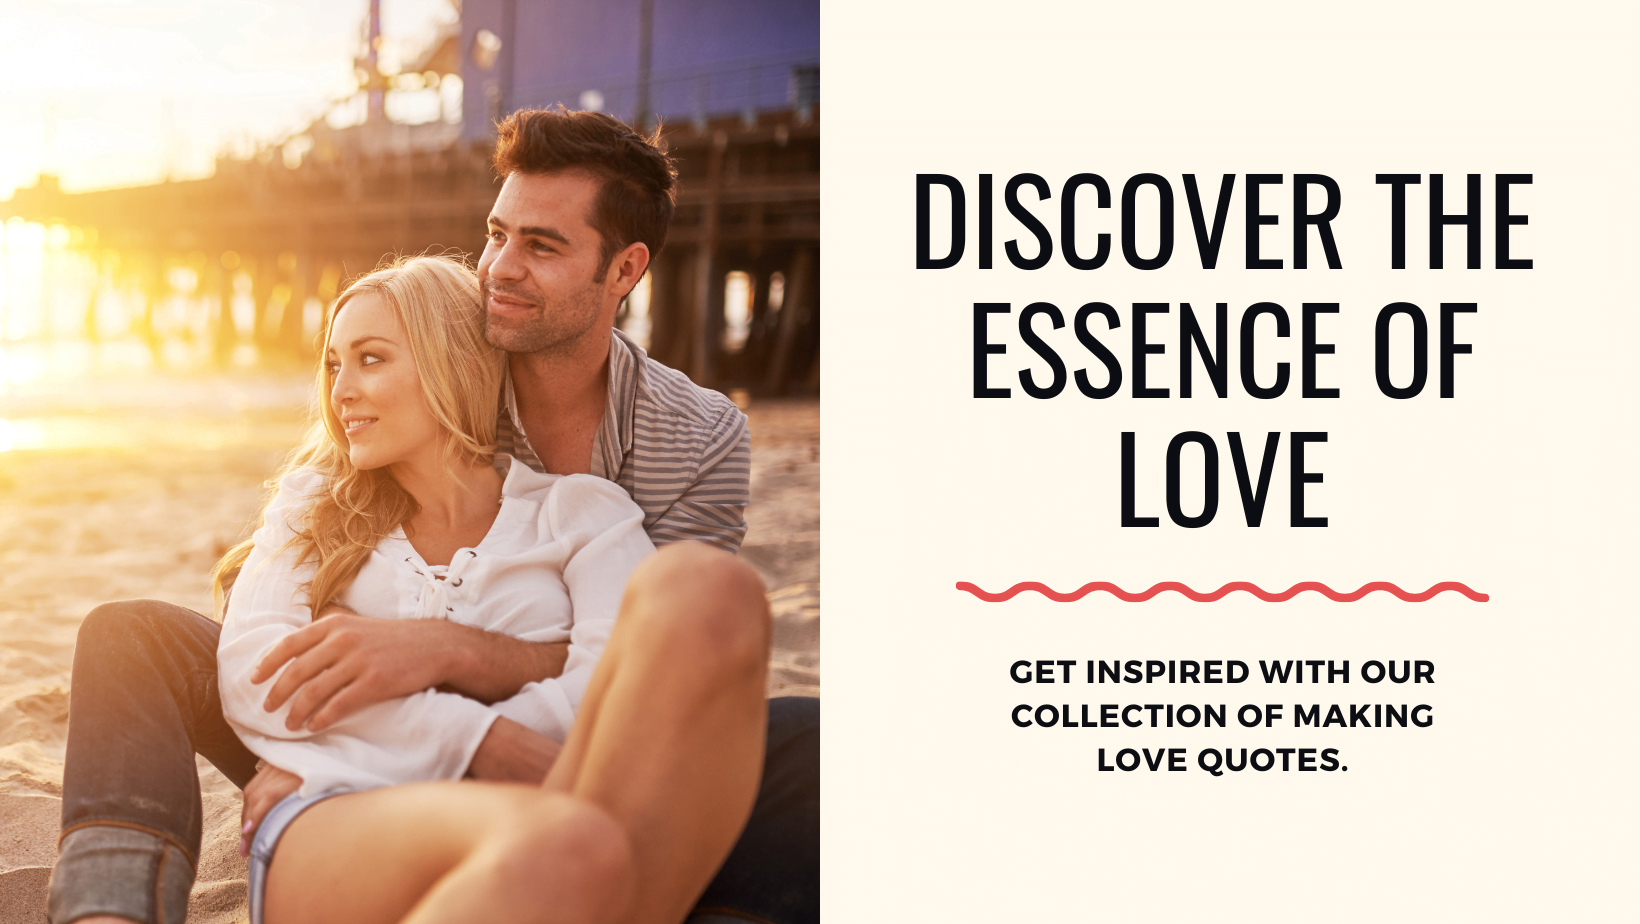 Discover the Essence of Love with These Mesmerizing Making Love Quotes